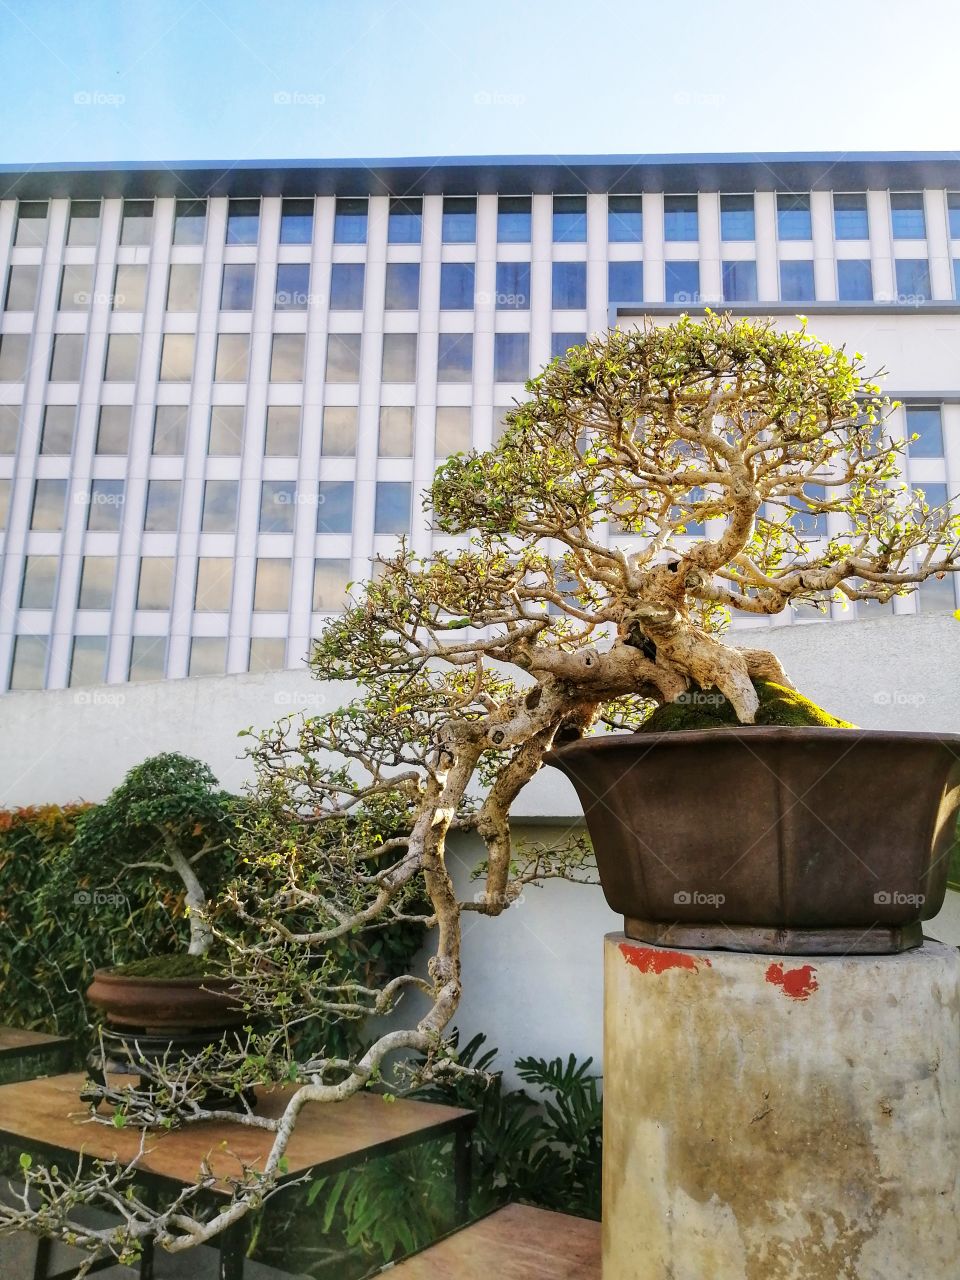 A bonsai tree on a pot that was used as a decoration with a view of the hotel at the back.